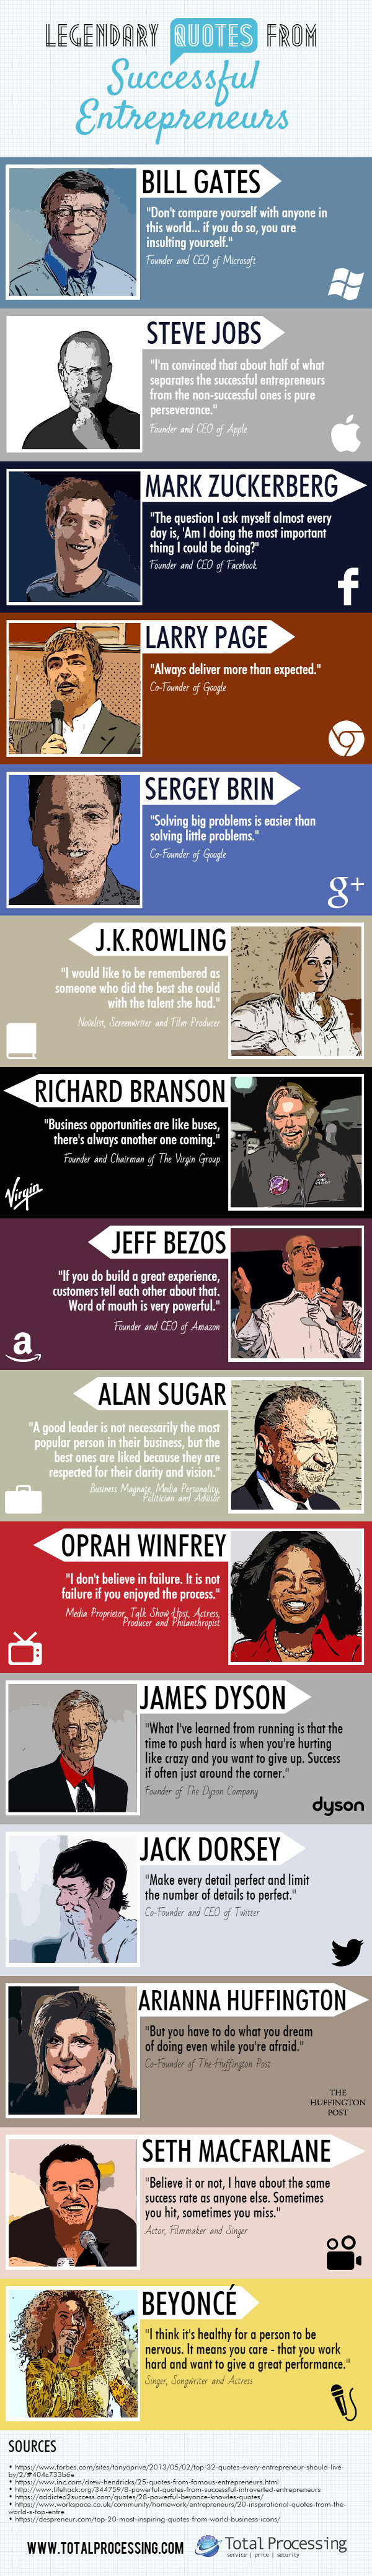 Infographic Quotes from Successful Legendary Entrepreneurs